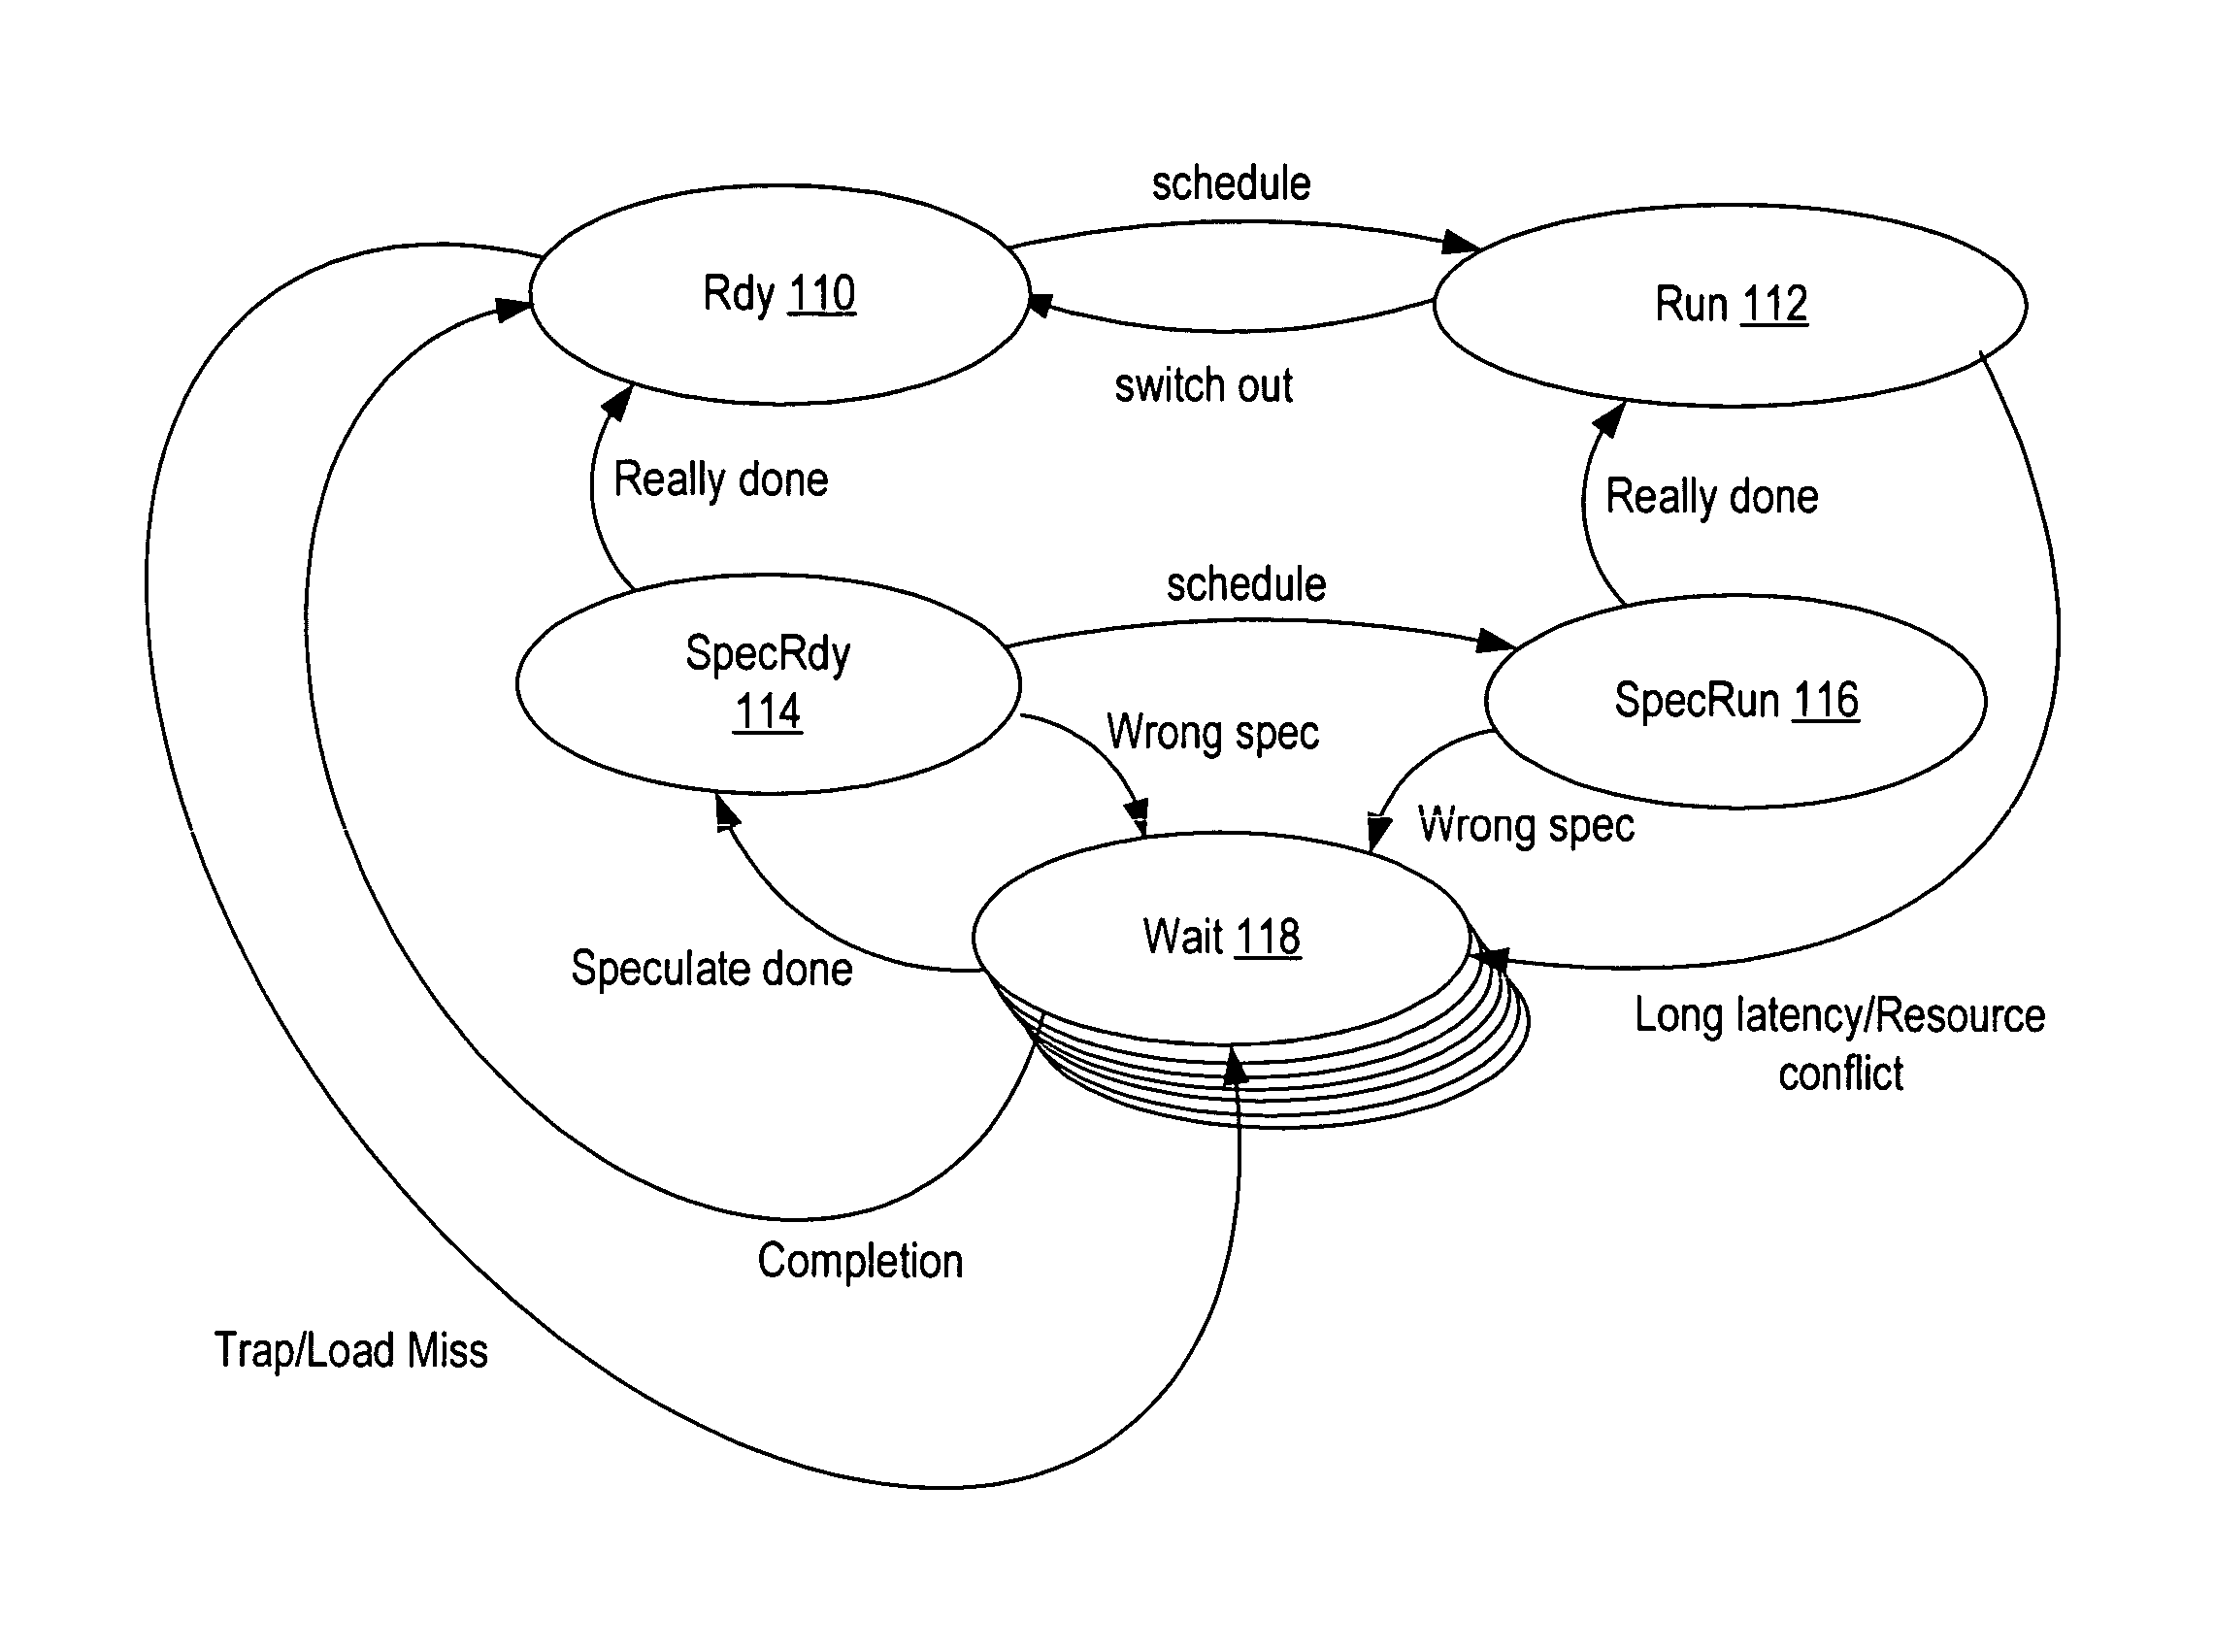 Method and apparatus for scheduling multiple threads for execution in a shared microprocessor pipeline